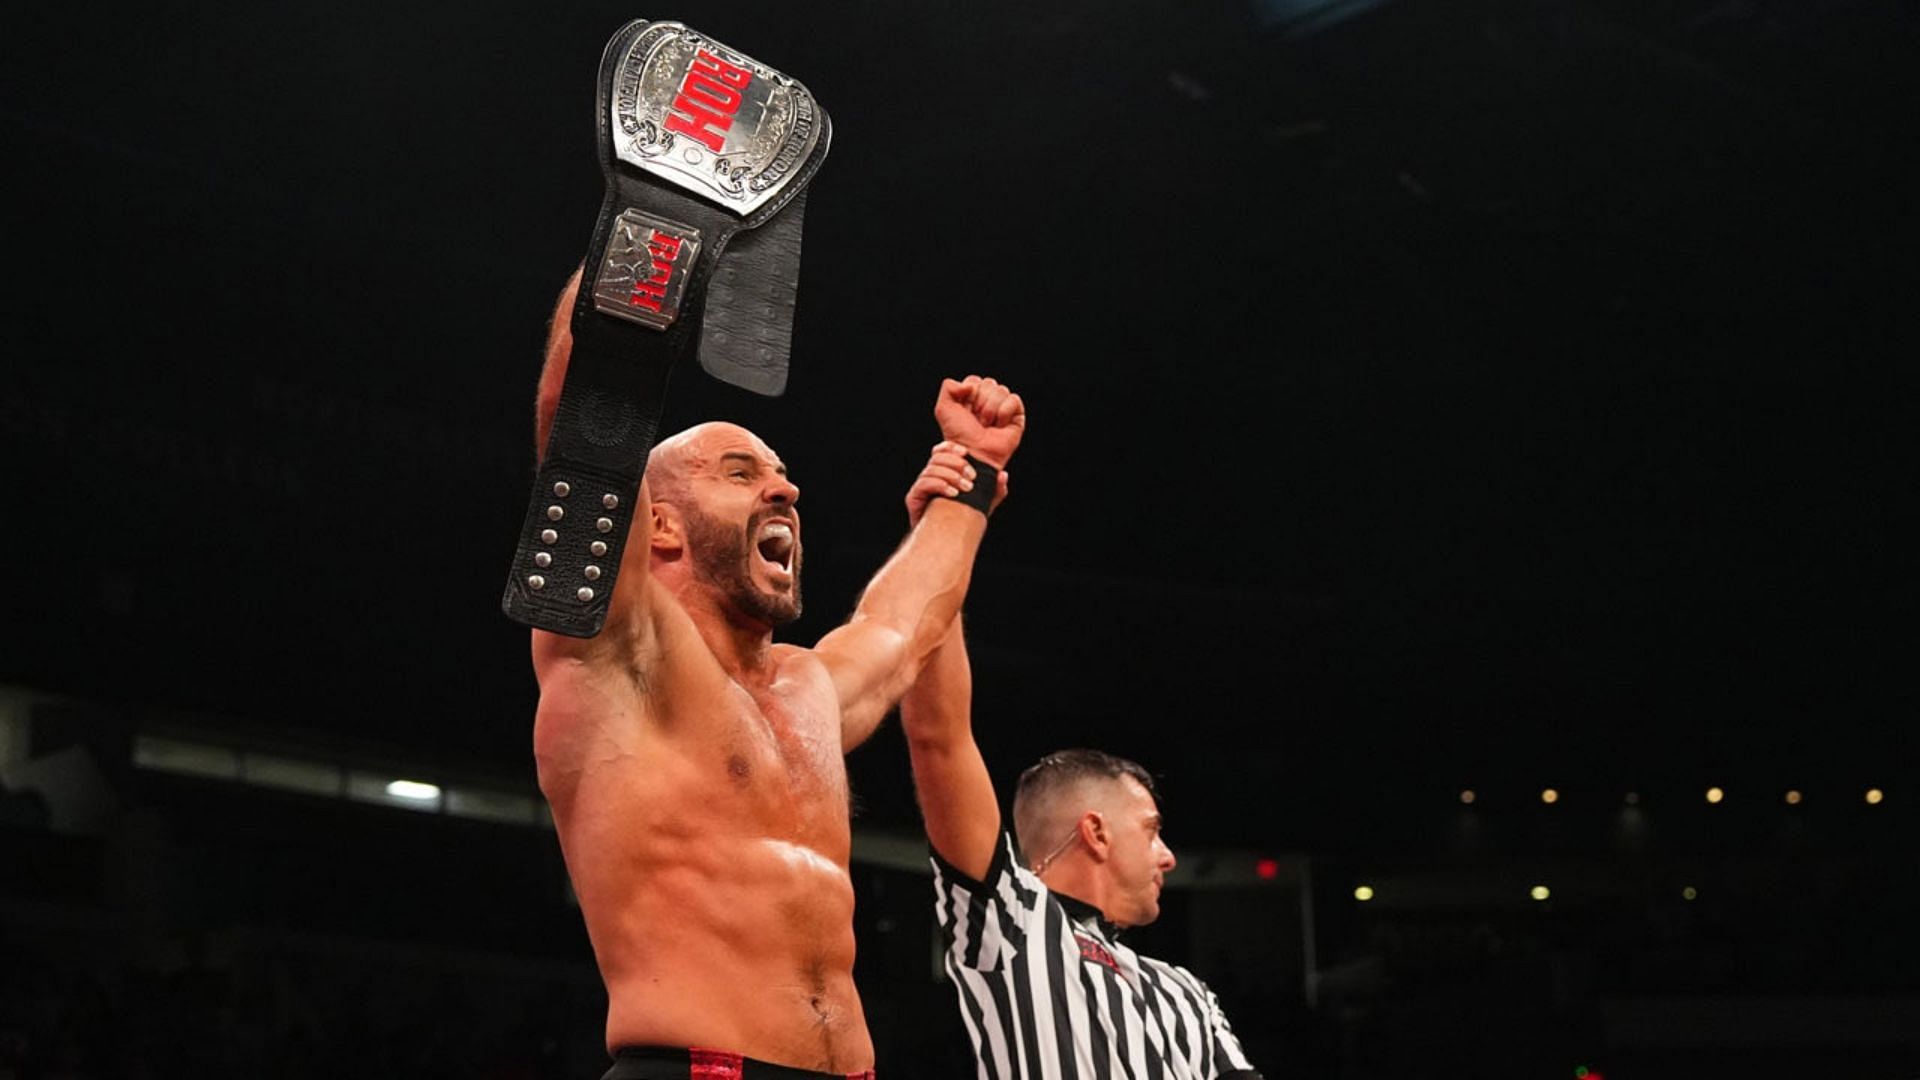 The Swiss Superman extended his run as ROH champ